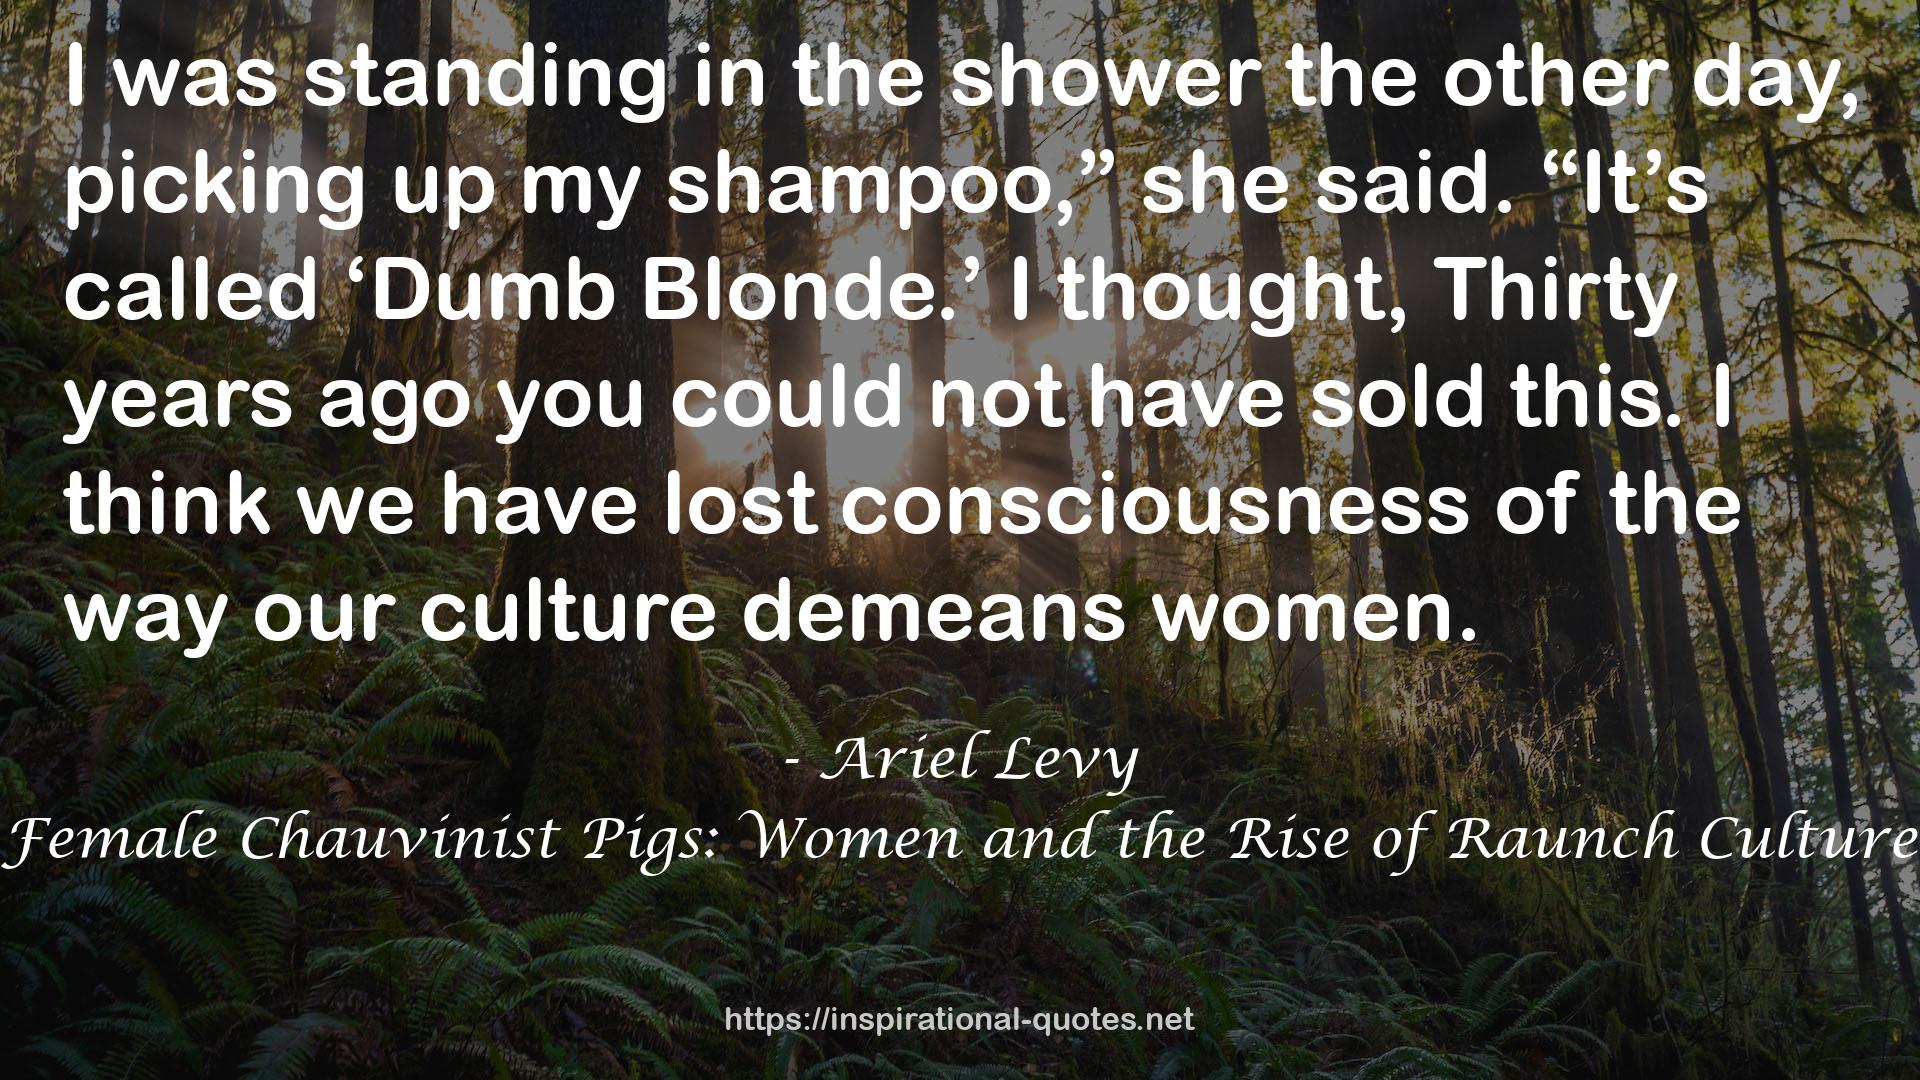 Female Chauvinist Pigs: Women and the Rise of Raunch Culture QUOTES